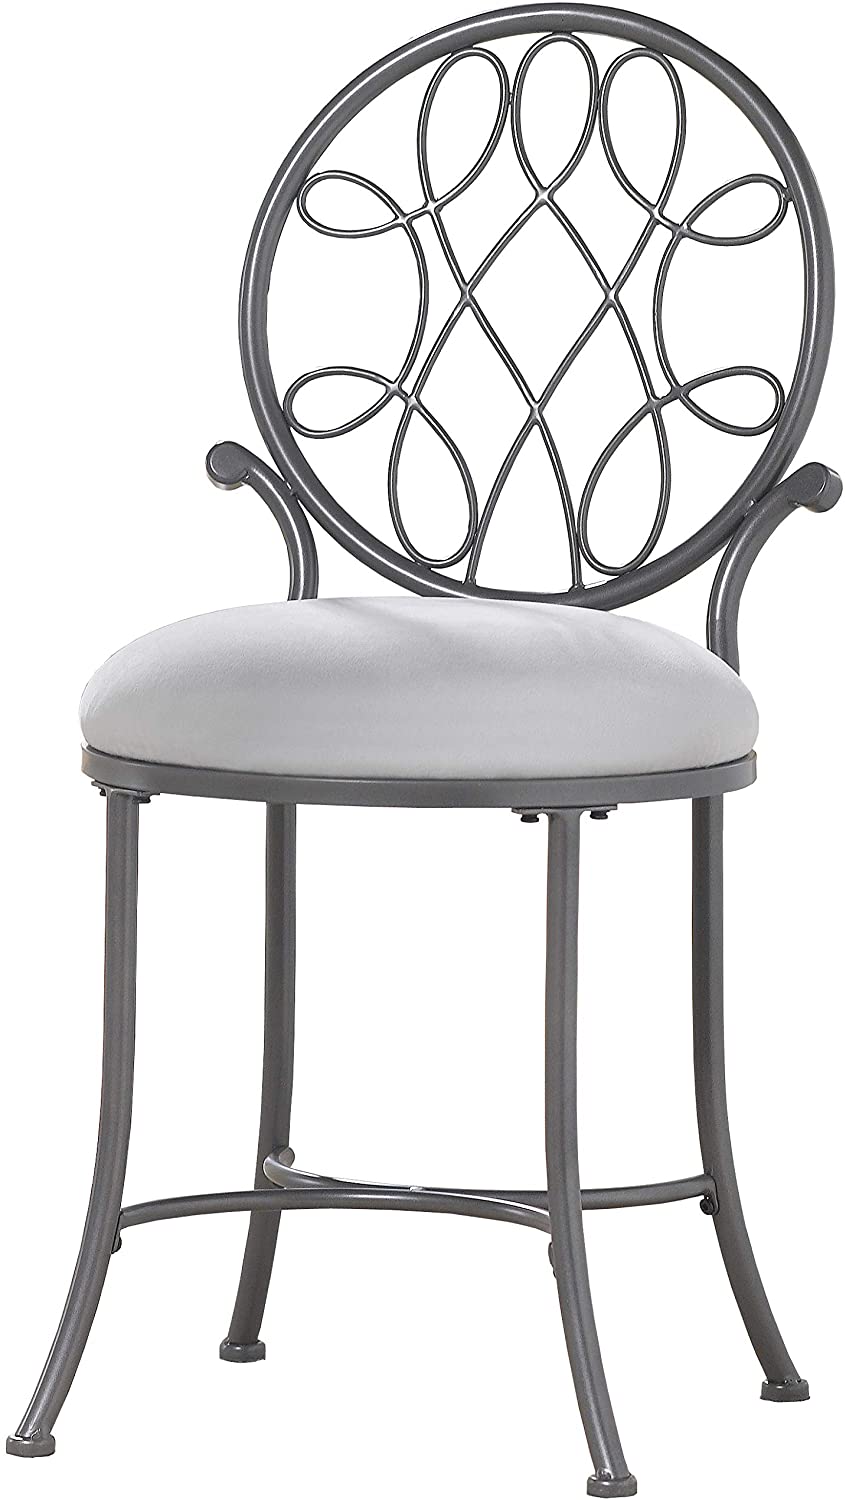 The Best Vanity Chairs October 2021, Vanity Chairs With Backs For Bathroom